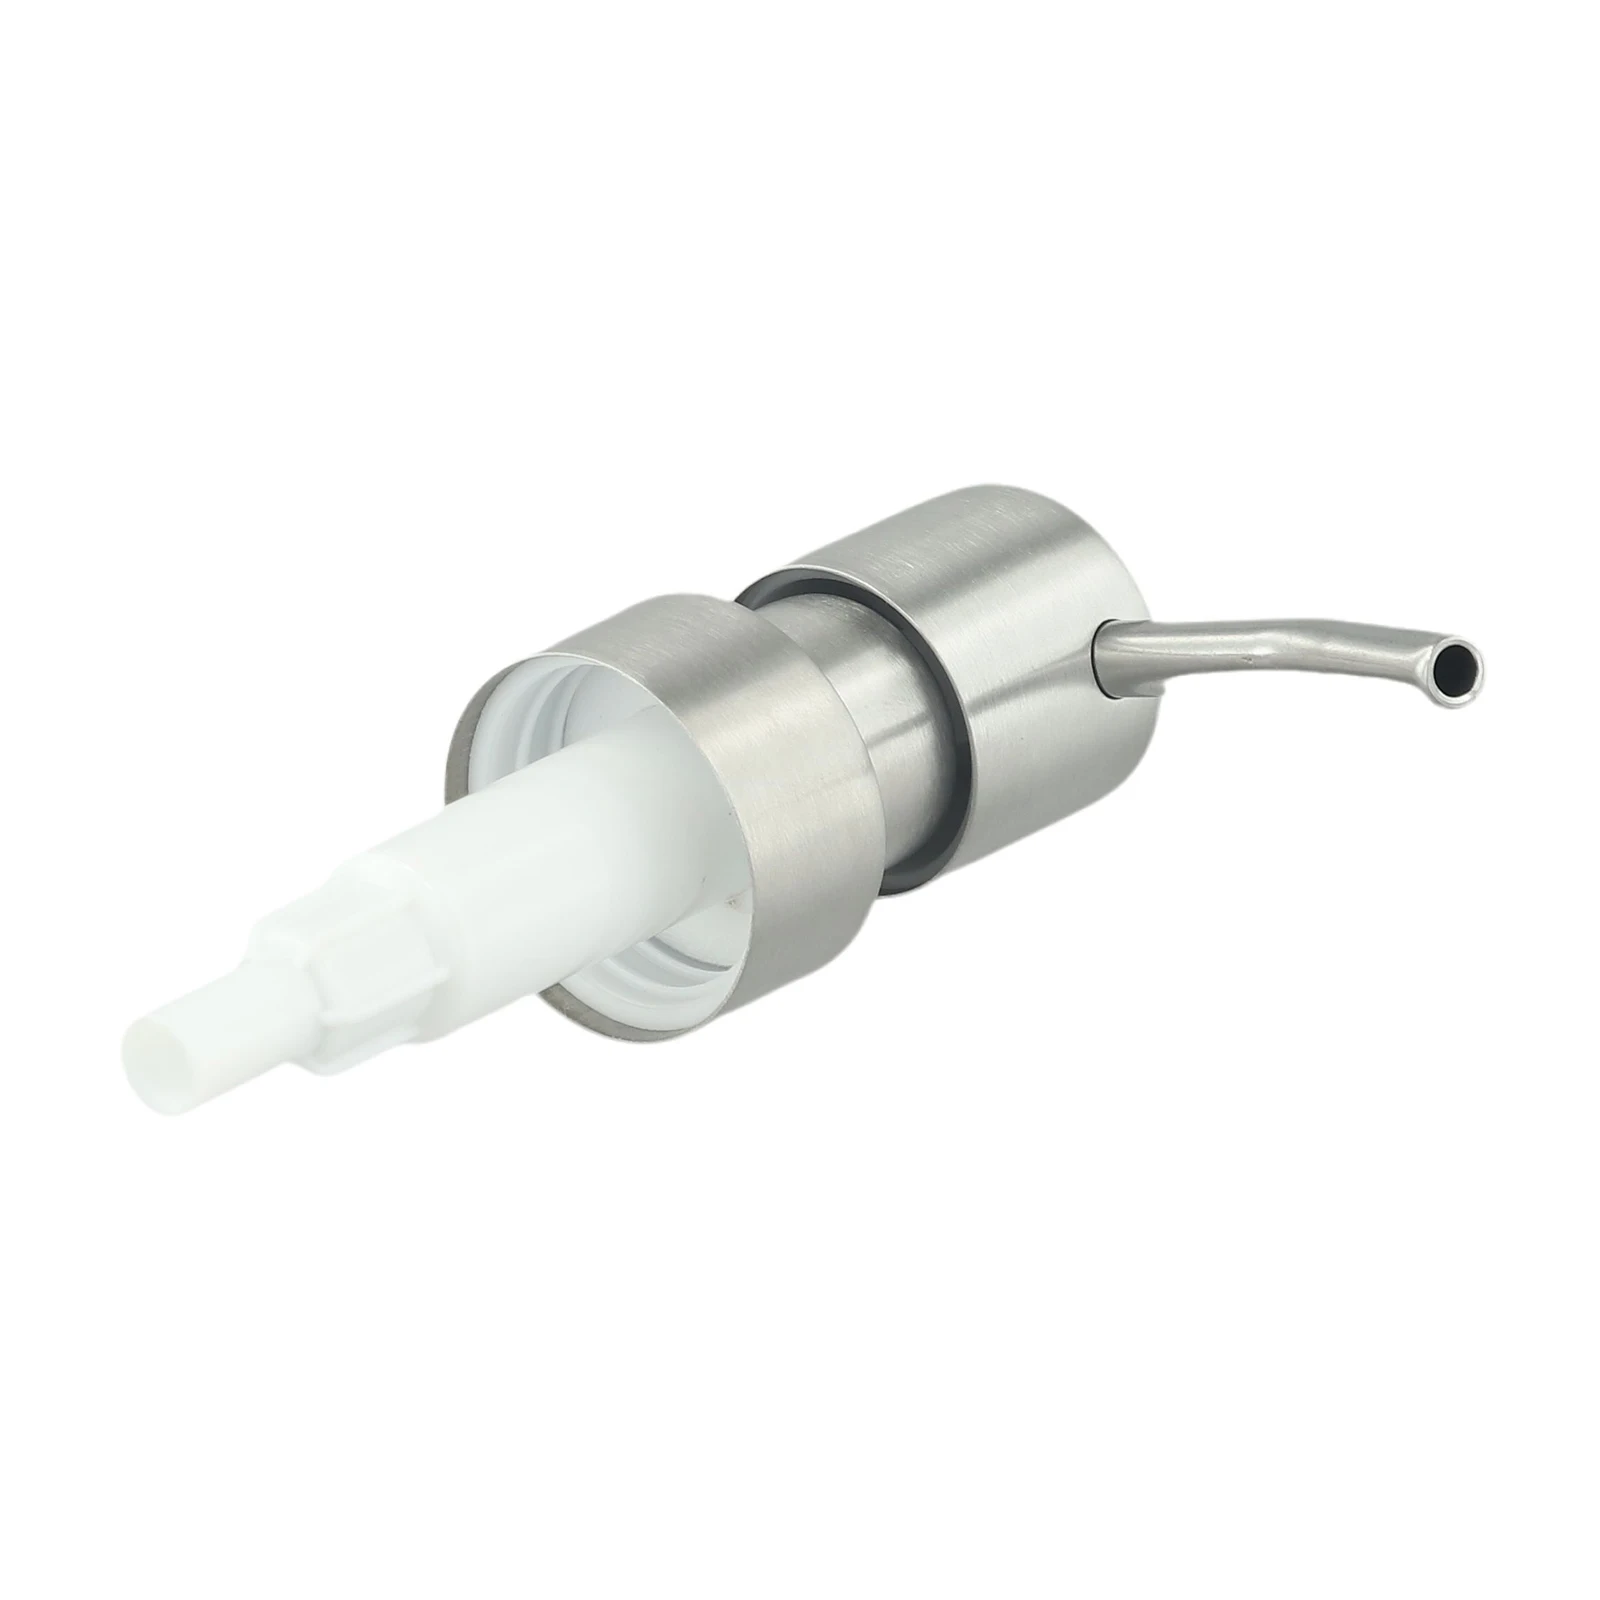 

Matte Brushed Finish Stainless Steel Pump Head with Soft Seal to Prevent Leakage Perfect for Your DIY Projects